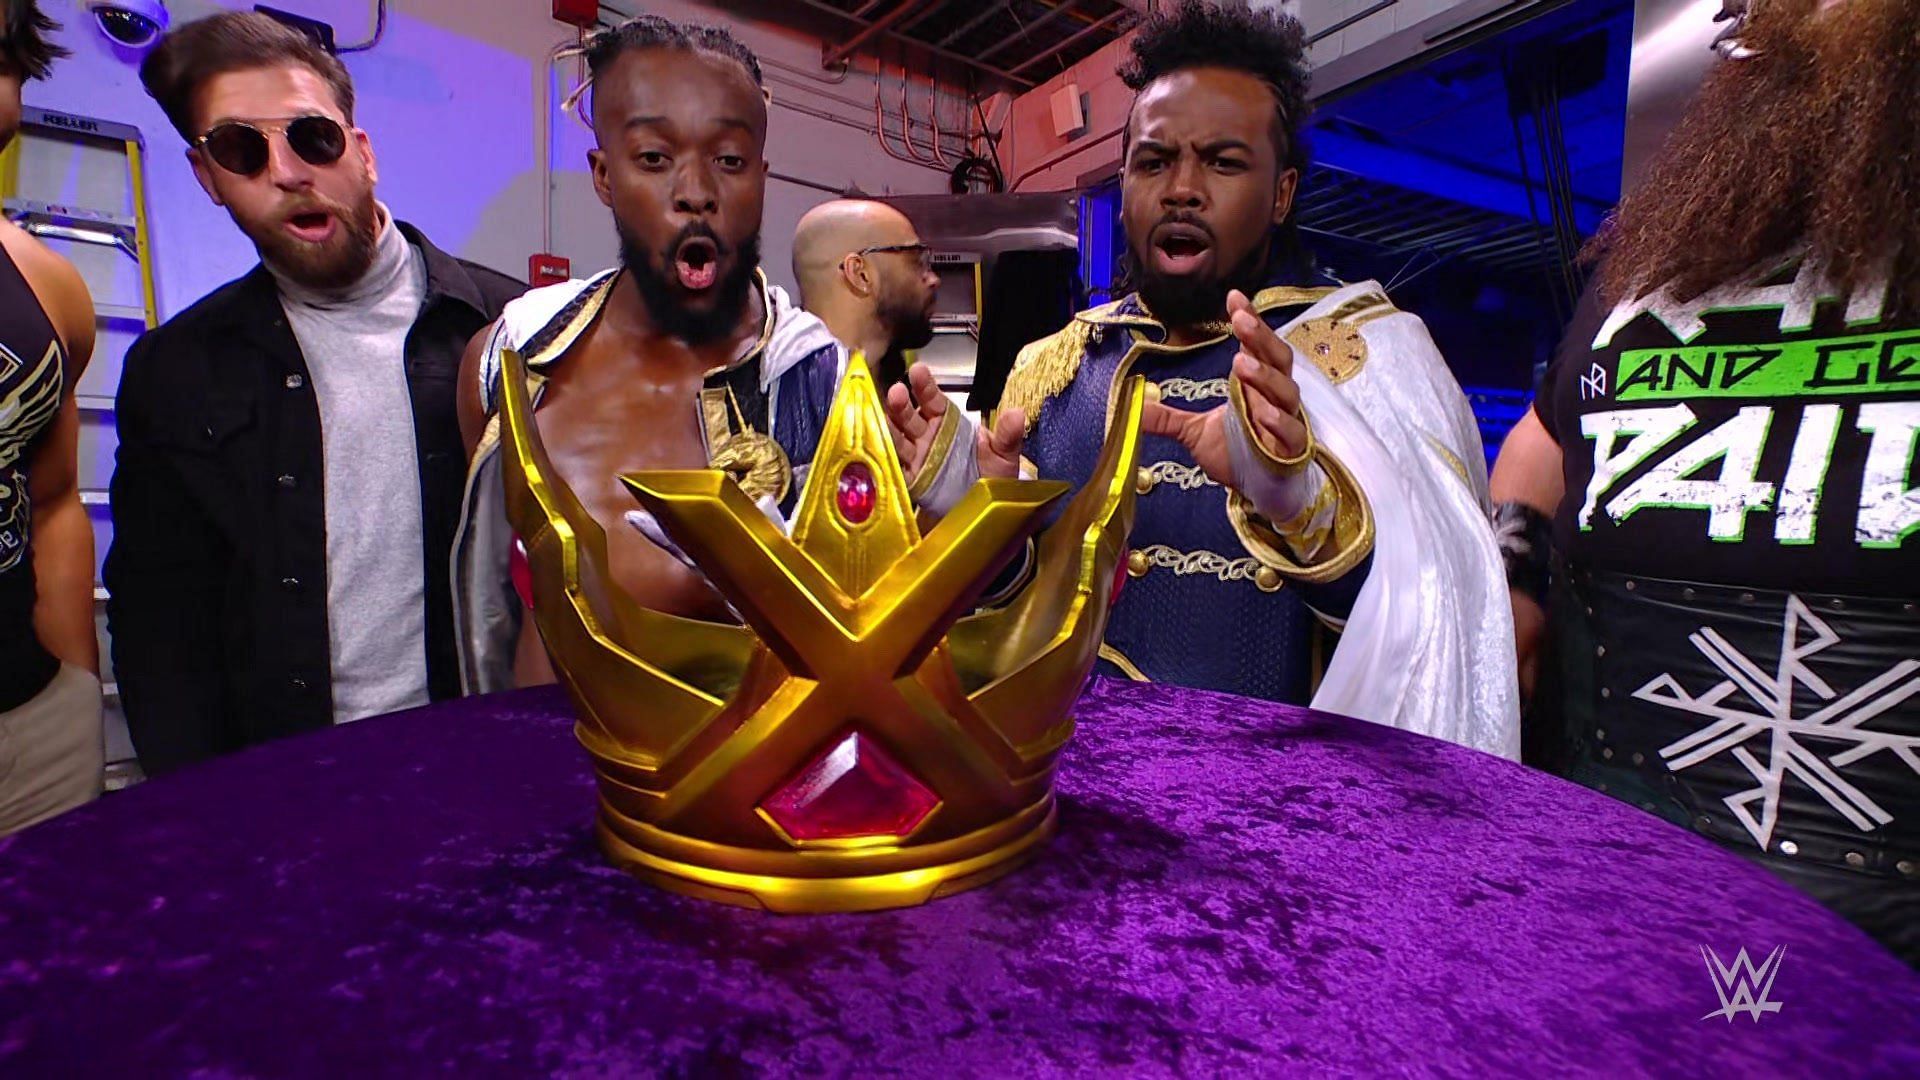 The King of the Ring crown